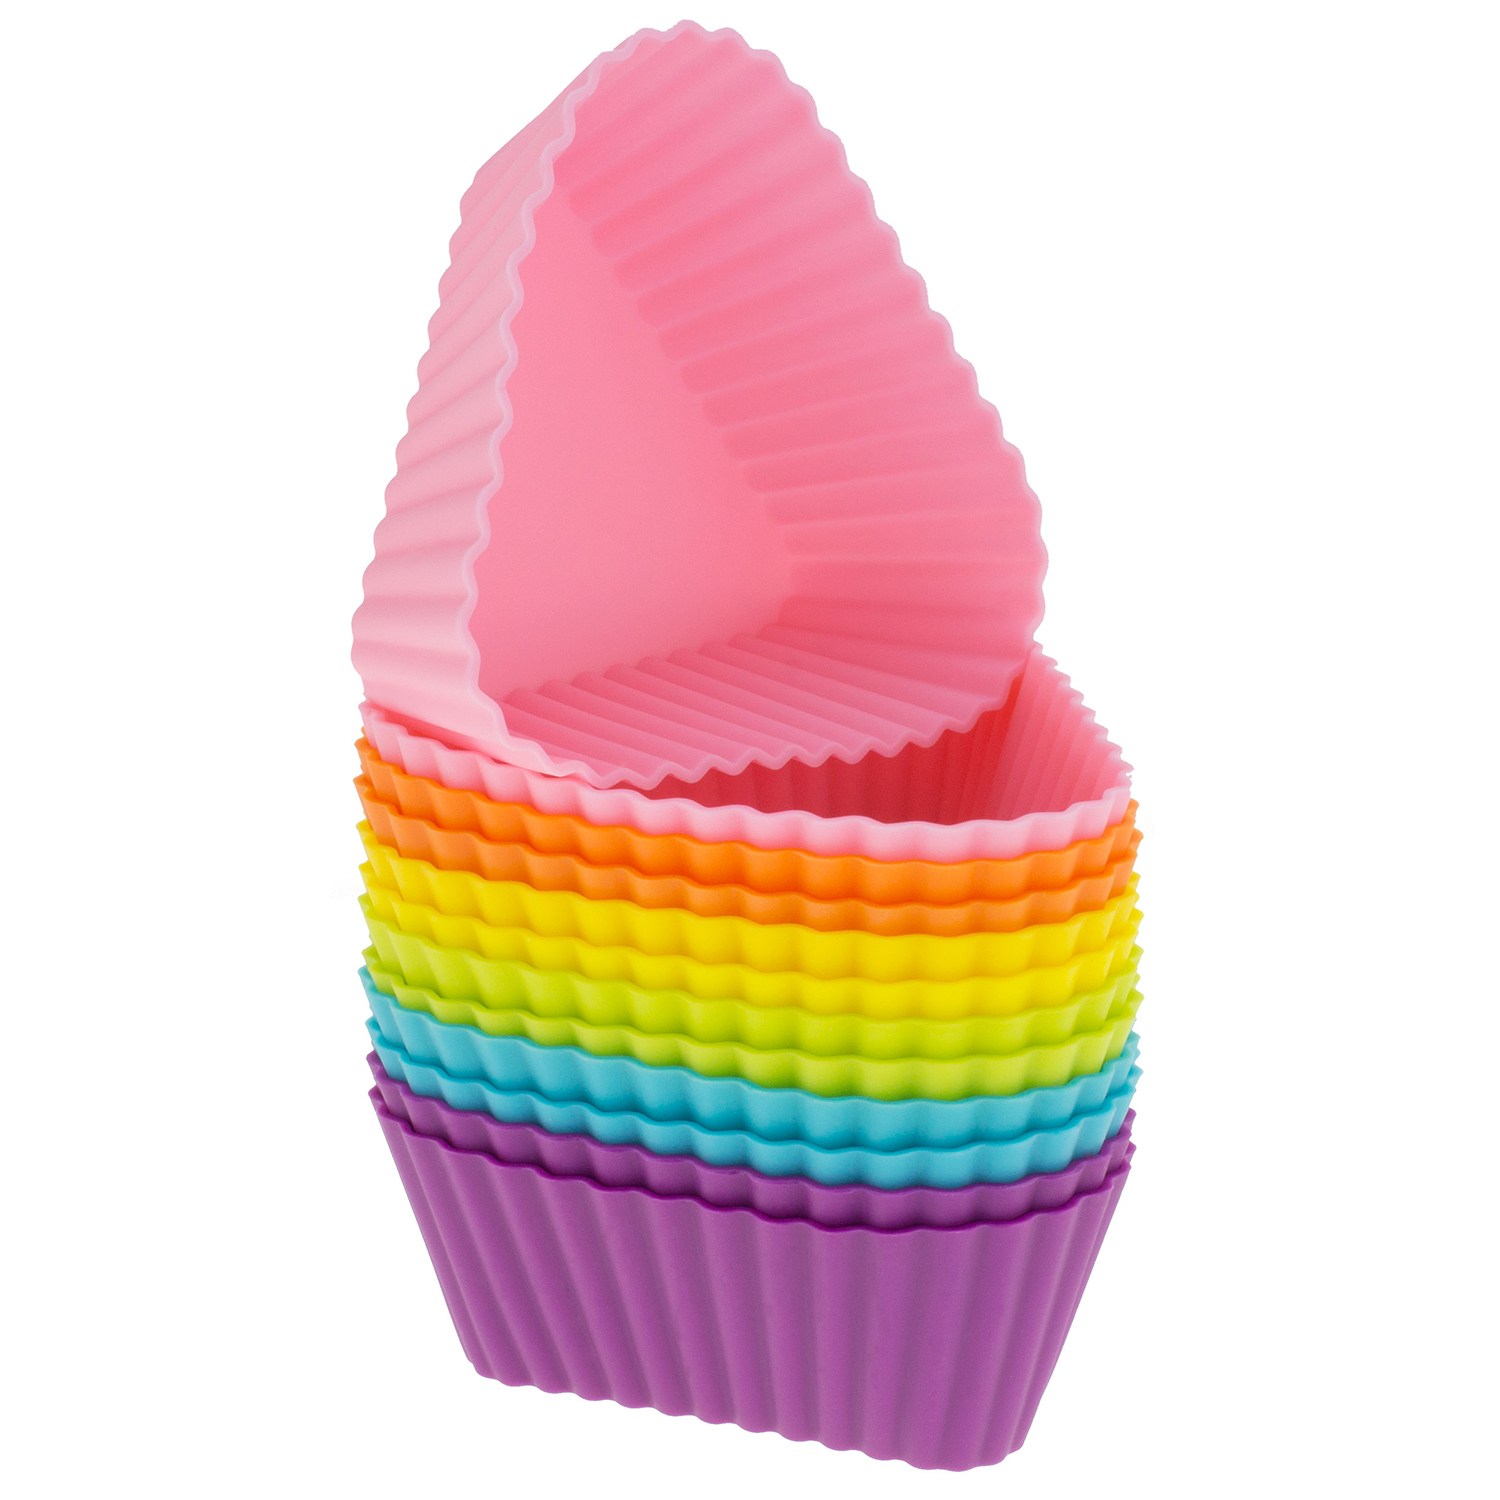 Freshware Silicone Cupcake Liners / Baking Cups - 12-Pack Muffin Molds, 2-6/8 inch Triangle, Six Vibrant Colors